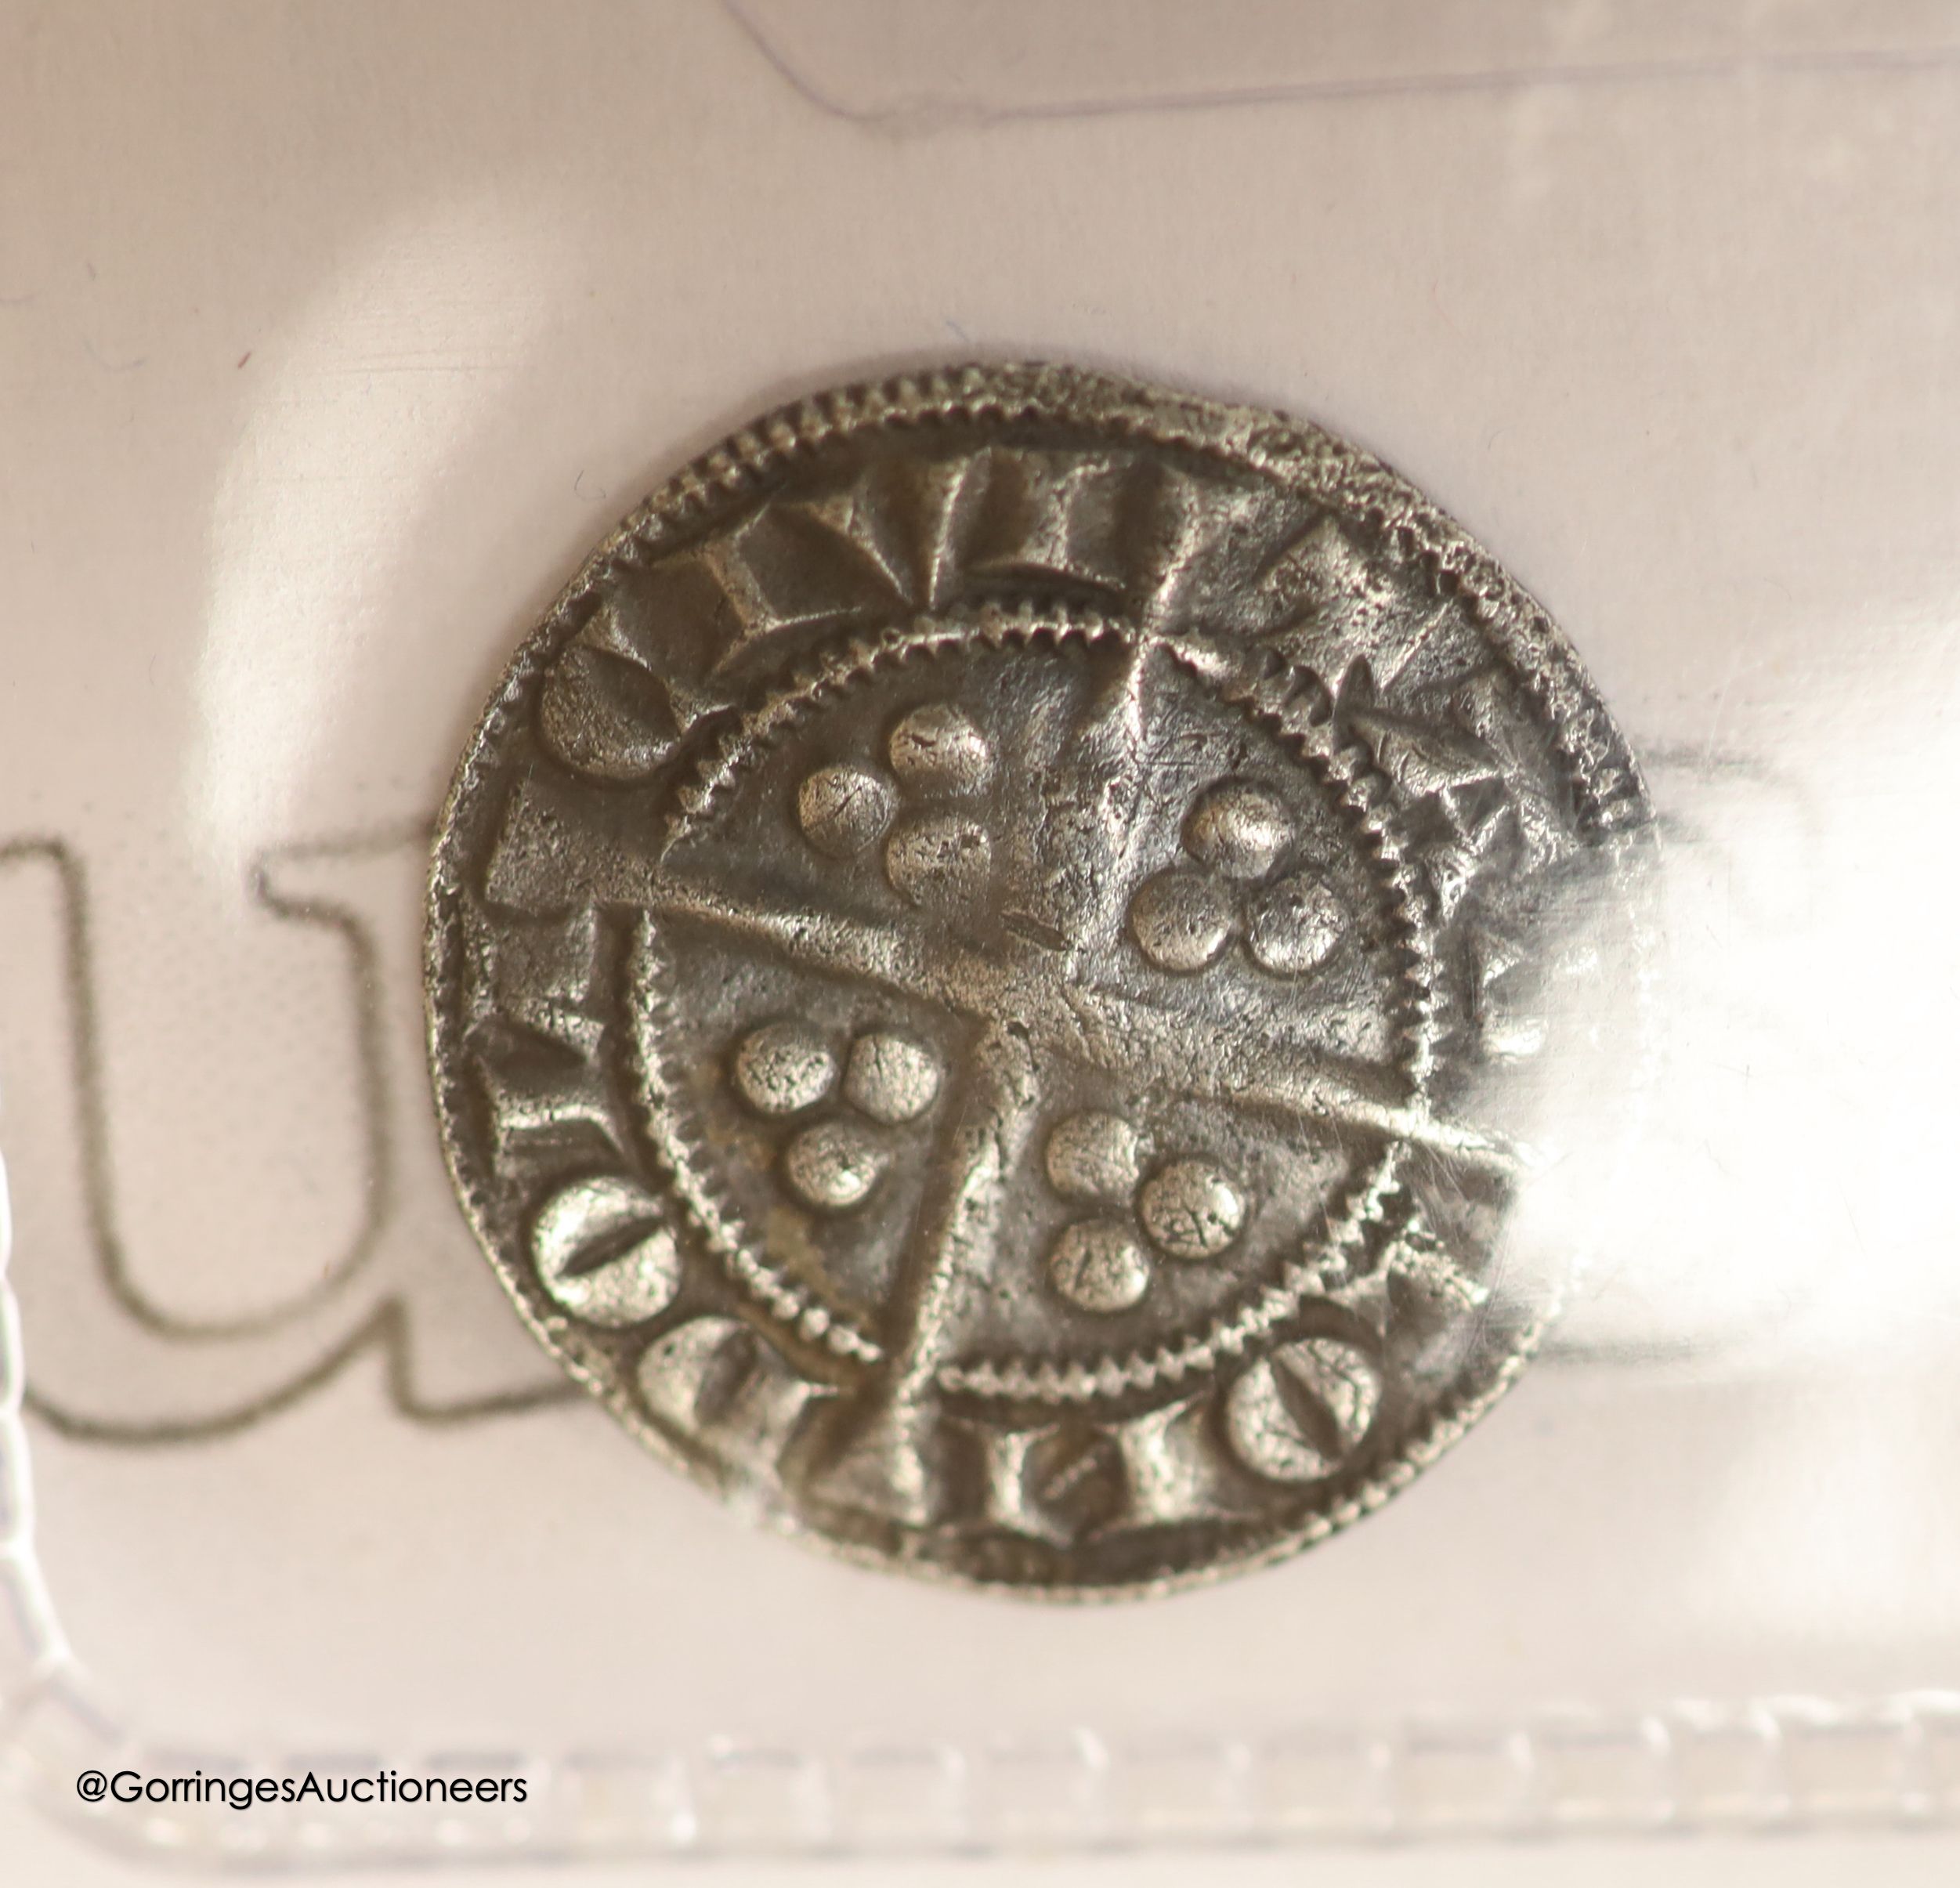 An Edward I silver penny, and Edward III half groat and a Charles I silver penny